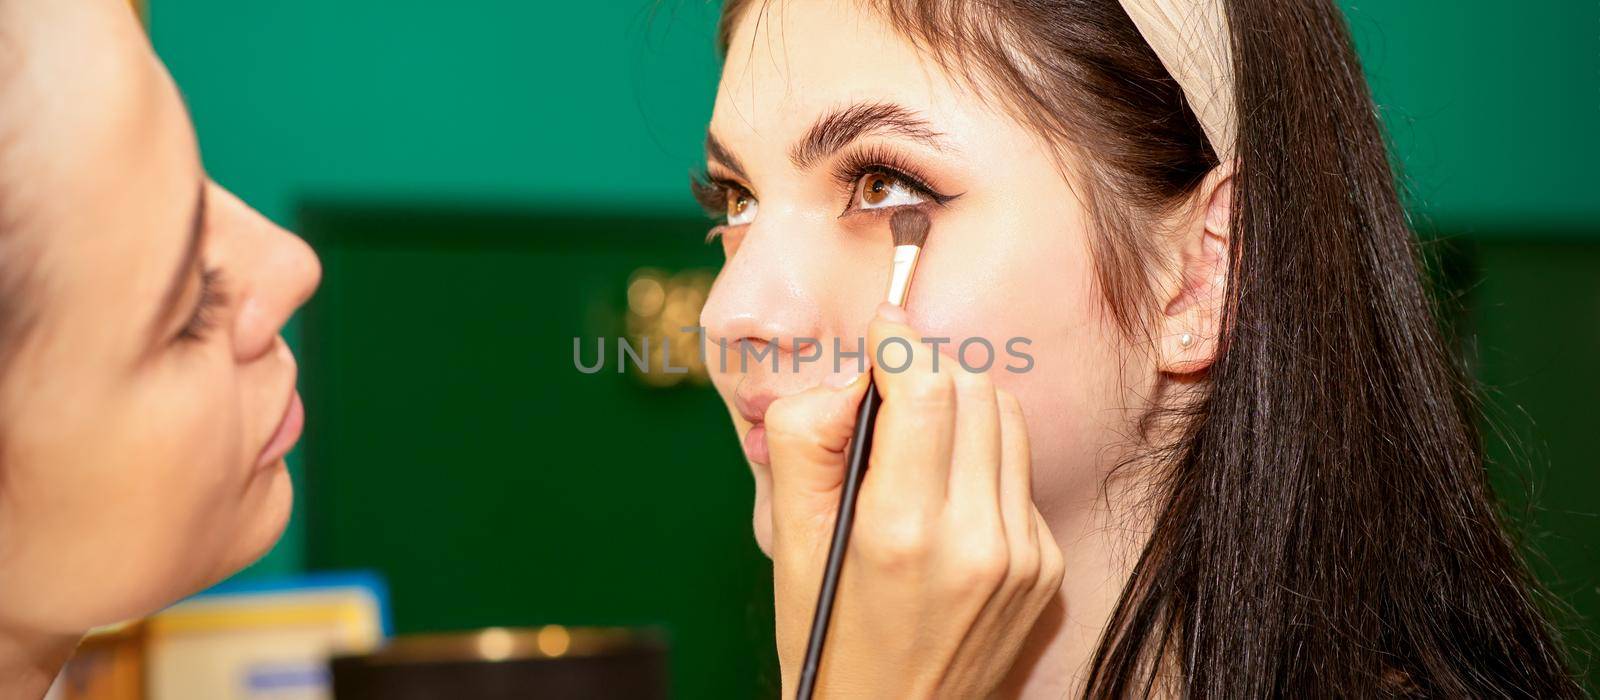 Make-up in the process. The hand of the makeup artist applies eye shadow under the eyes of a young beautiful caucasian model woman